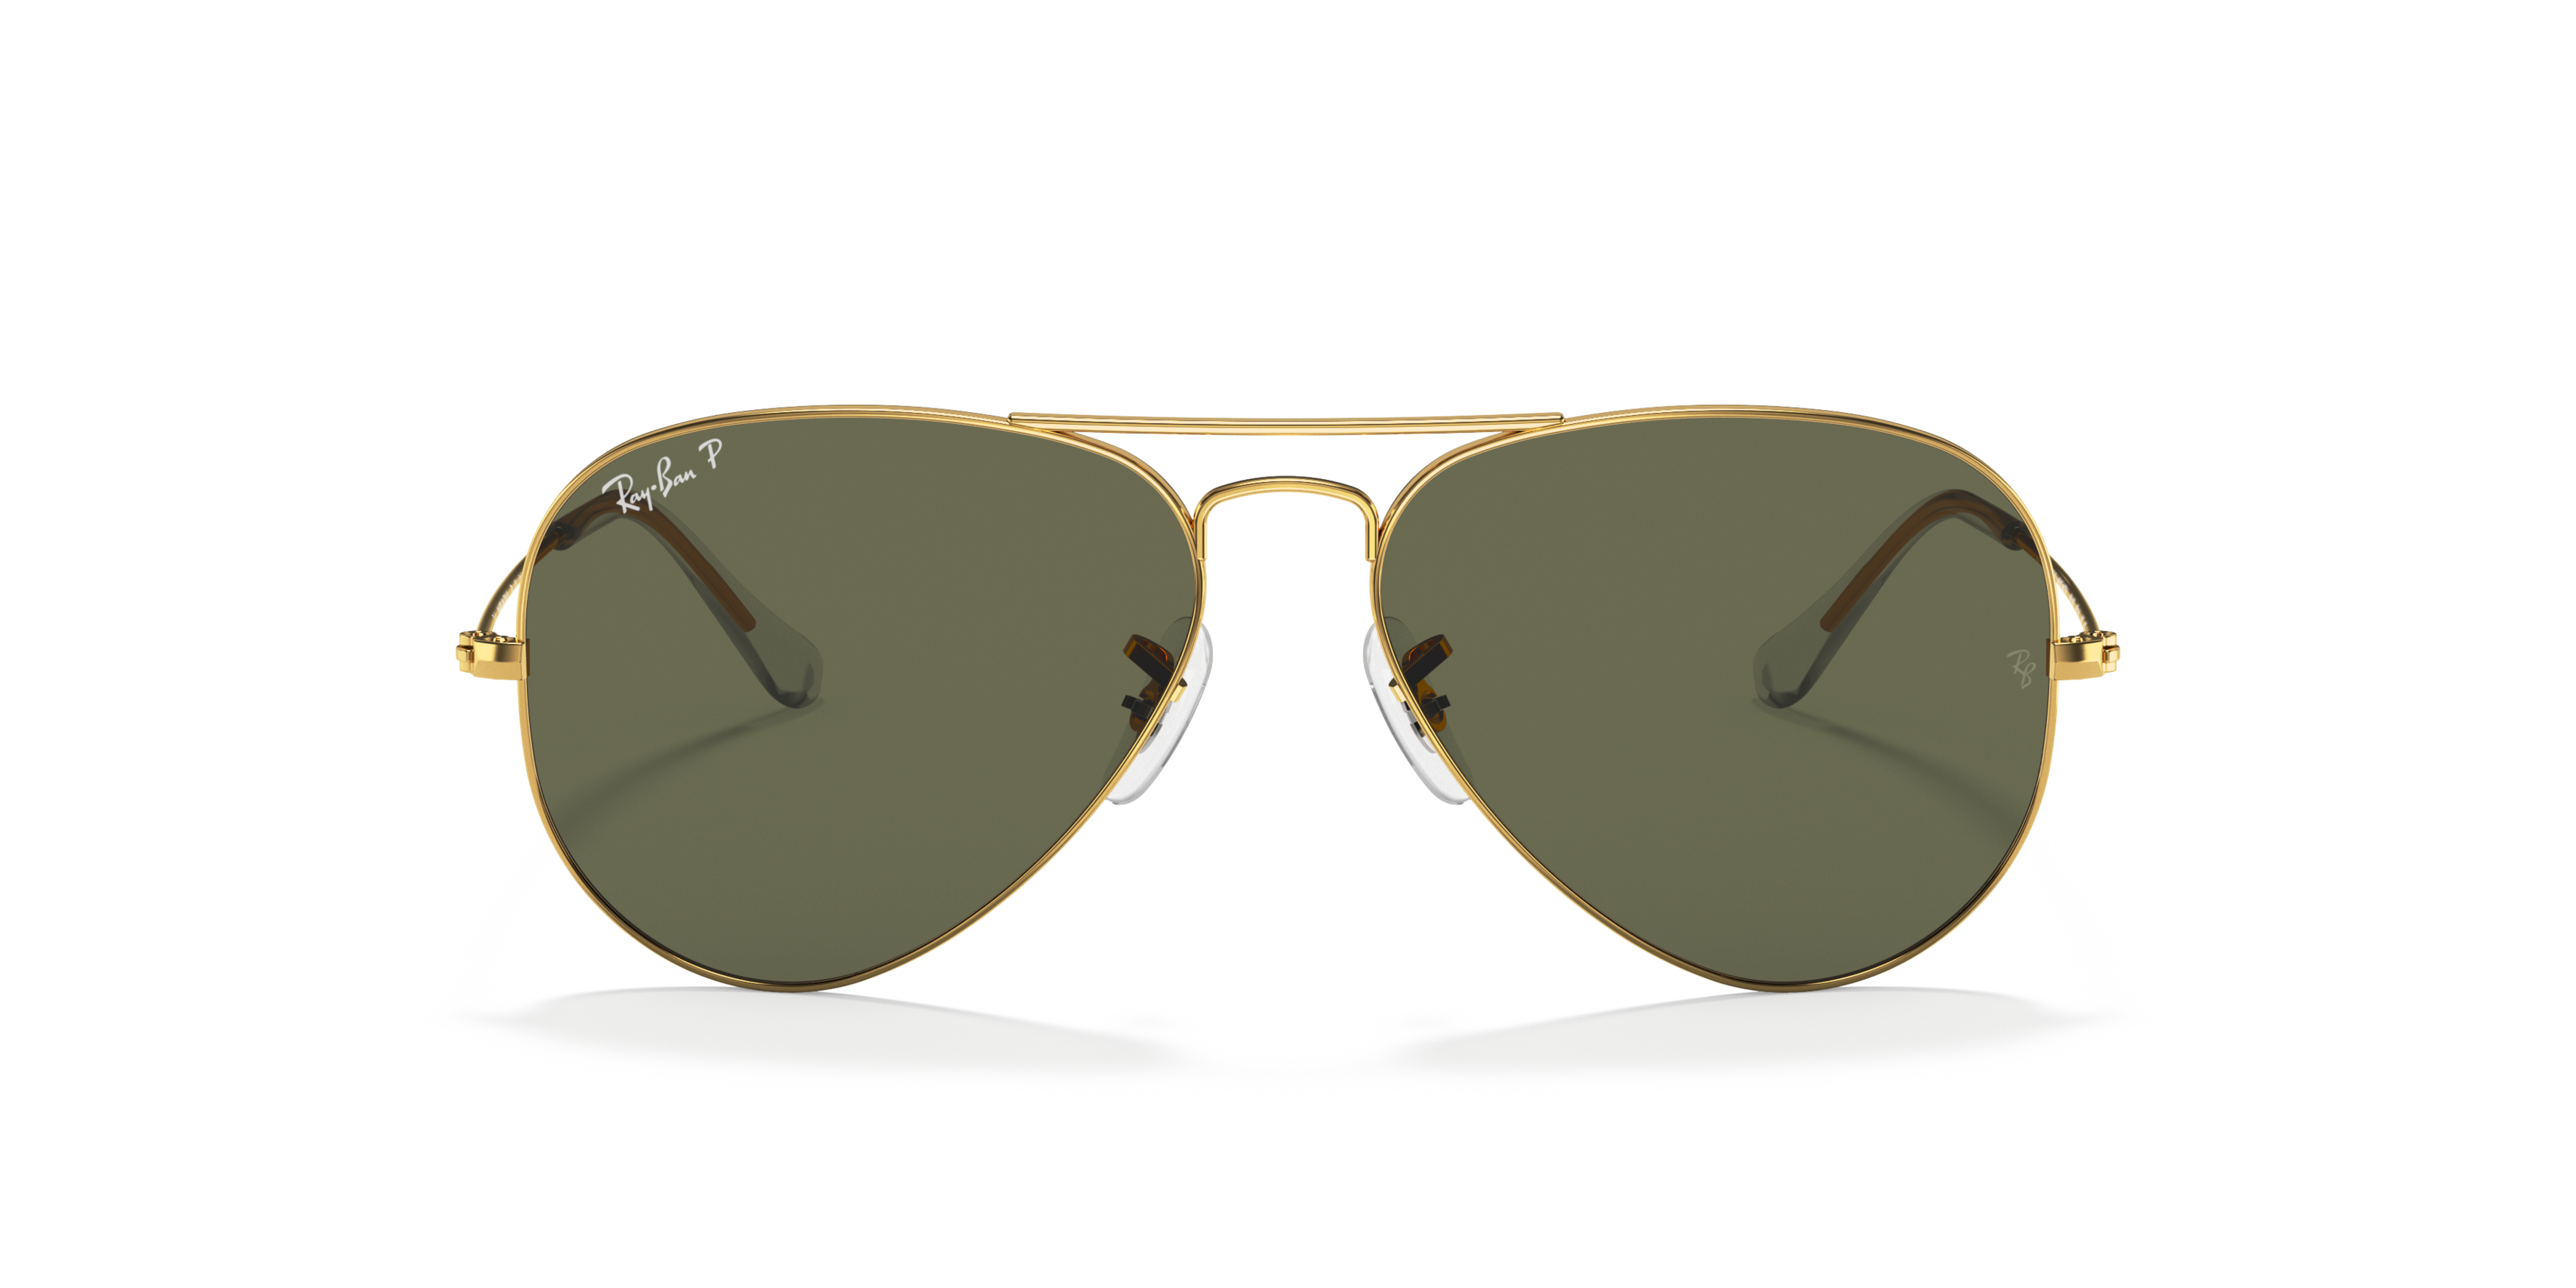 [products.image.front] Ray-Ban Aviator Gradient RB3025 001/58